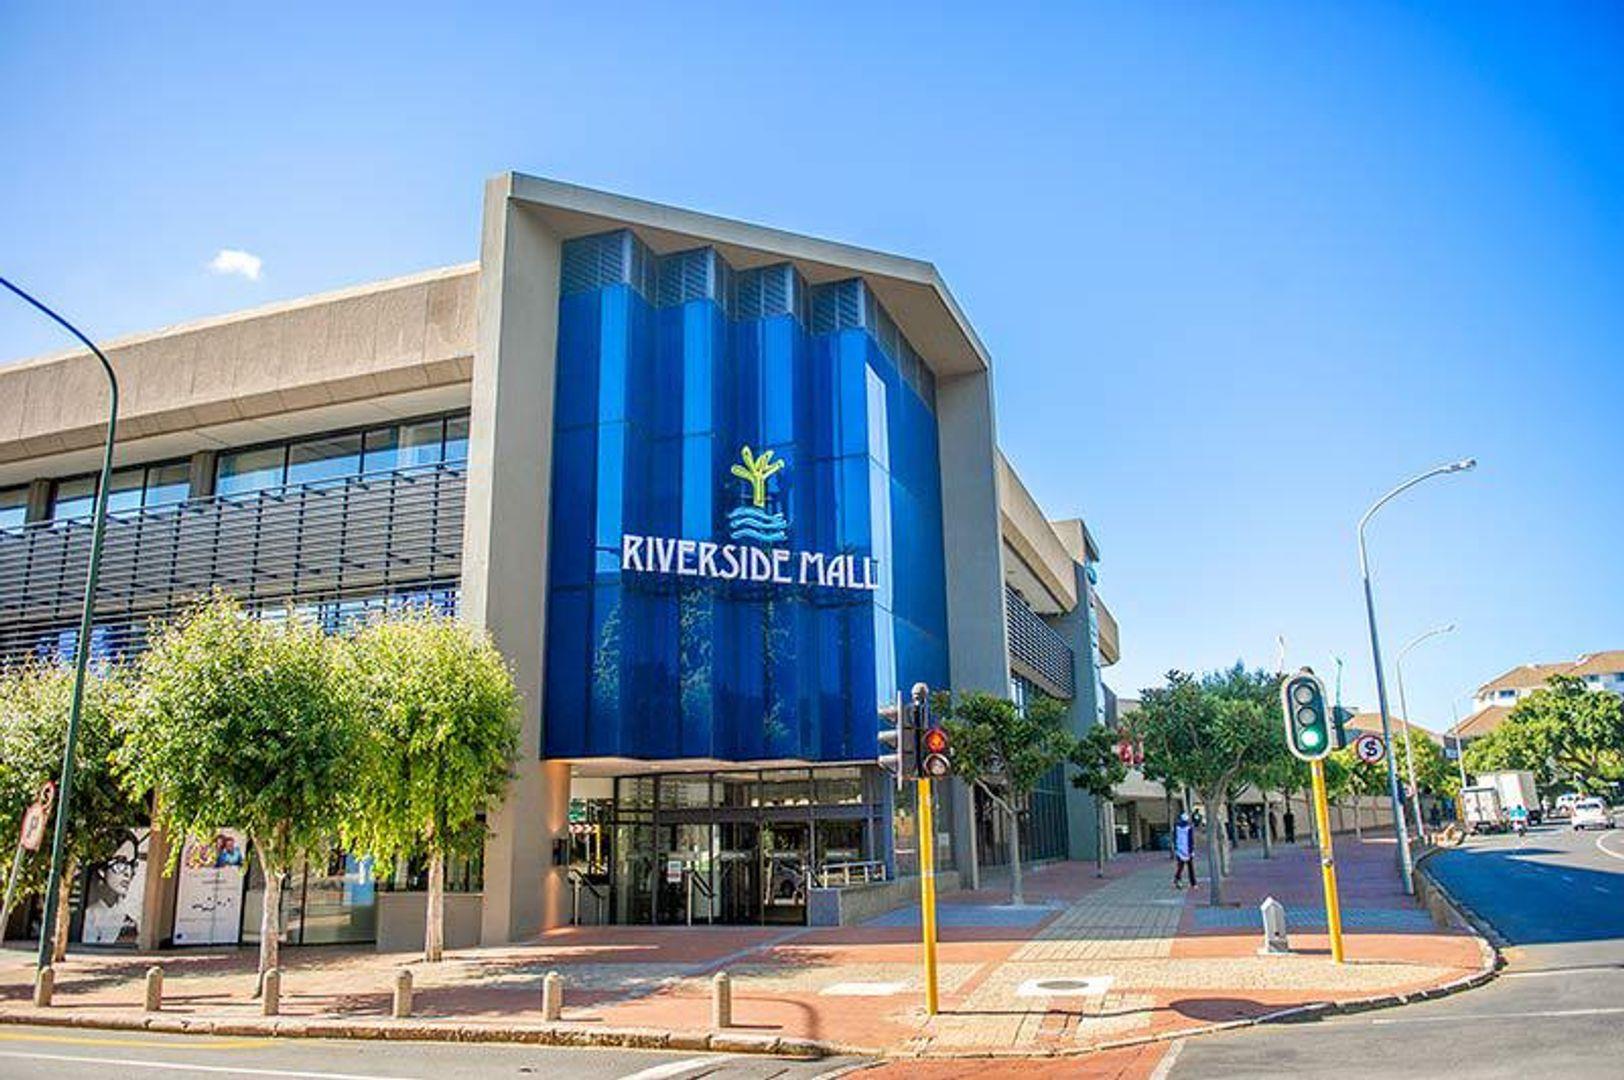 Riverside Mall on Rondebosch Main Road offers shoppers everything